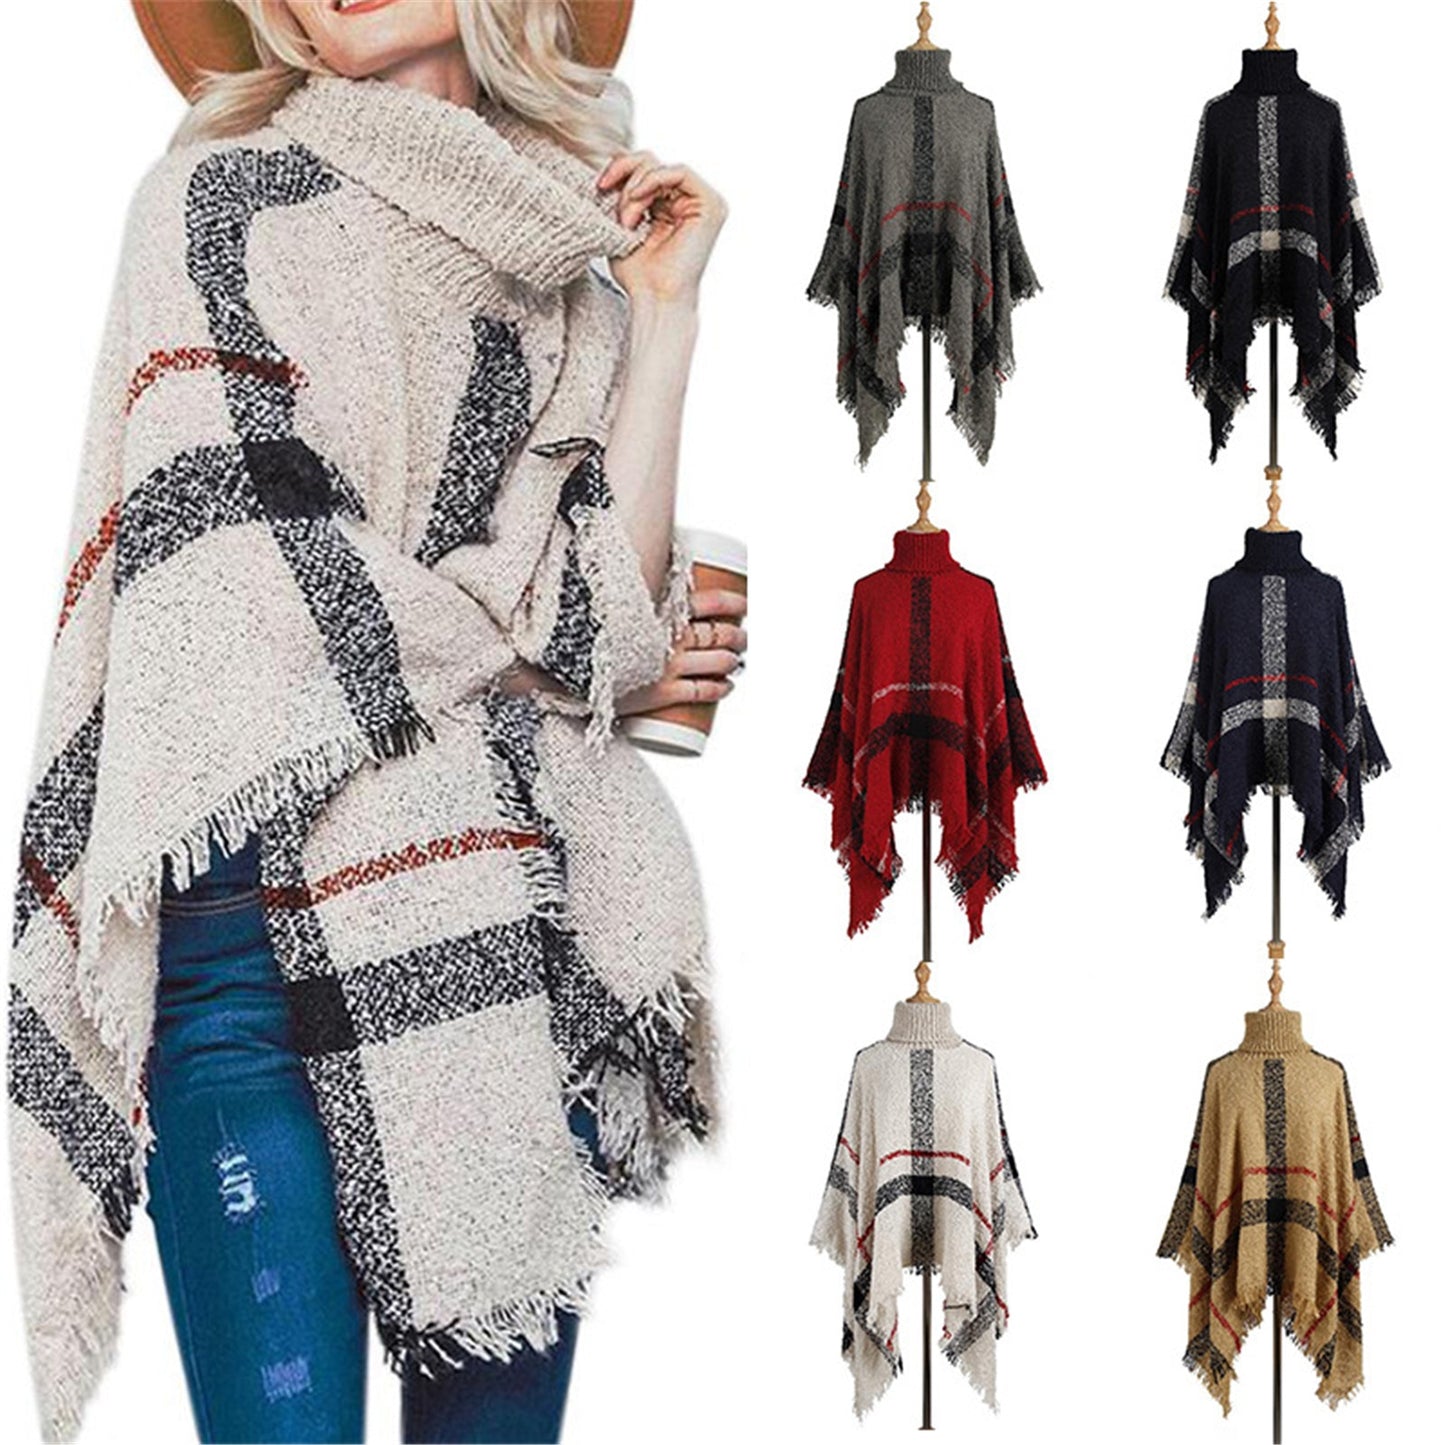 2021 New Sweater Women European And American Mid-length High Neck Tassel Cloak Shawl Loose Large Size Sweater